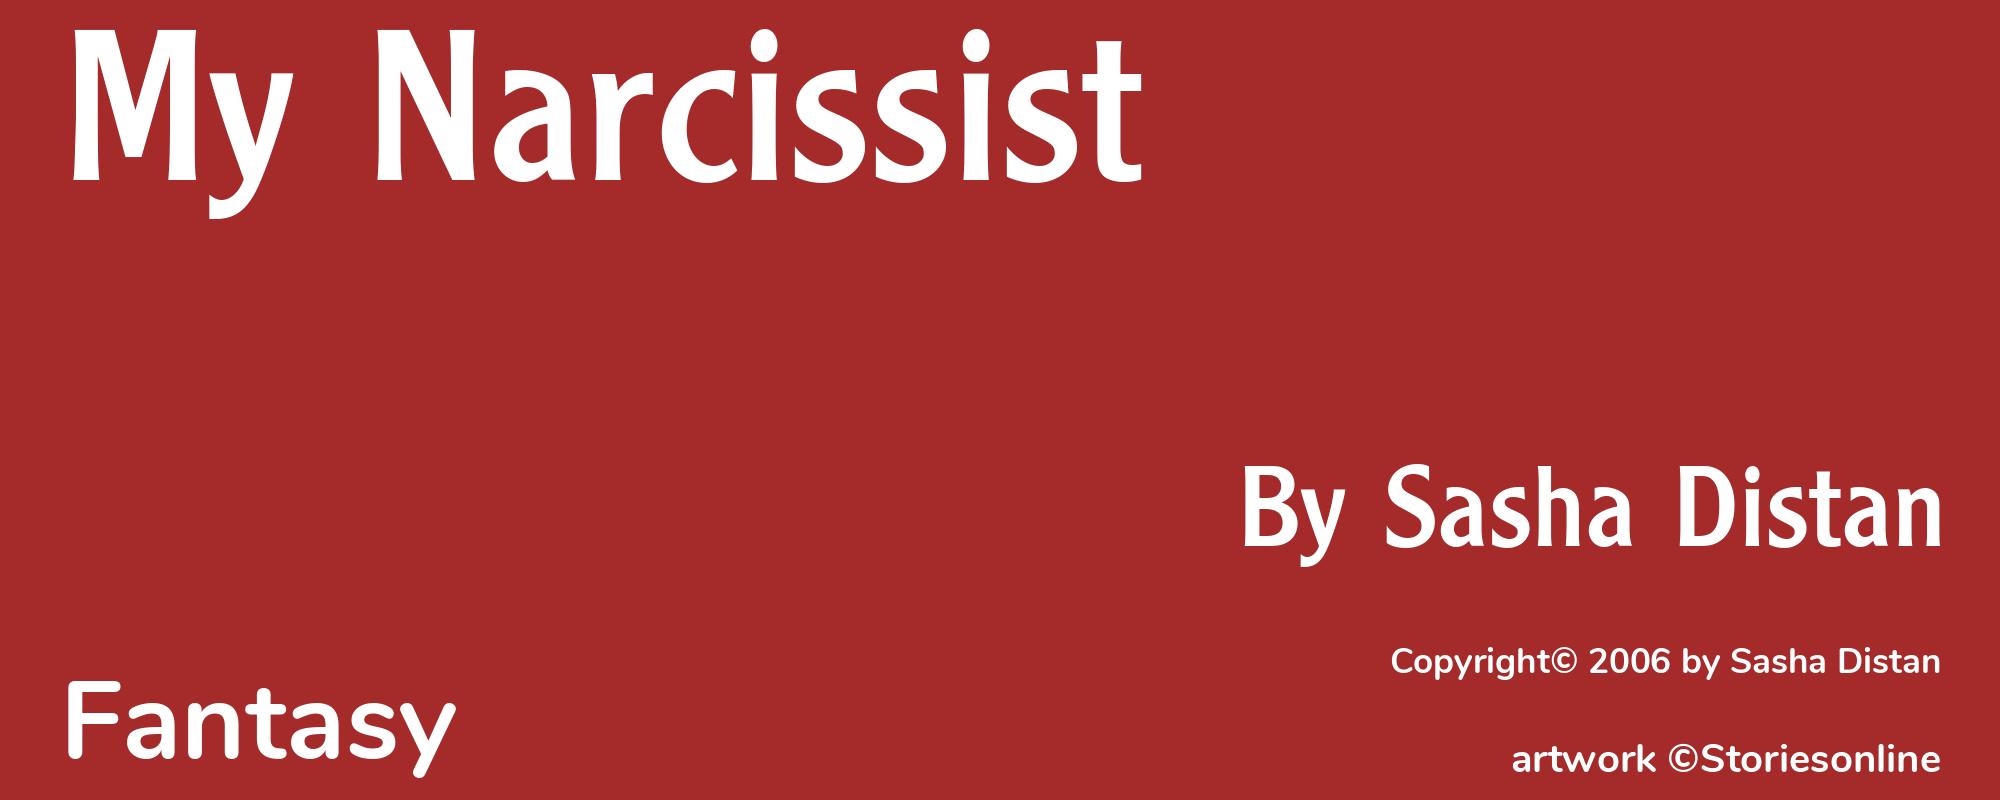 My Narcissist - Cover